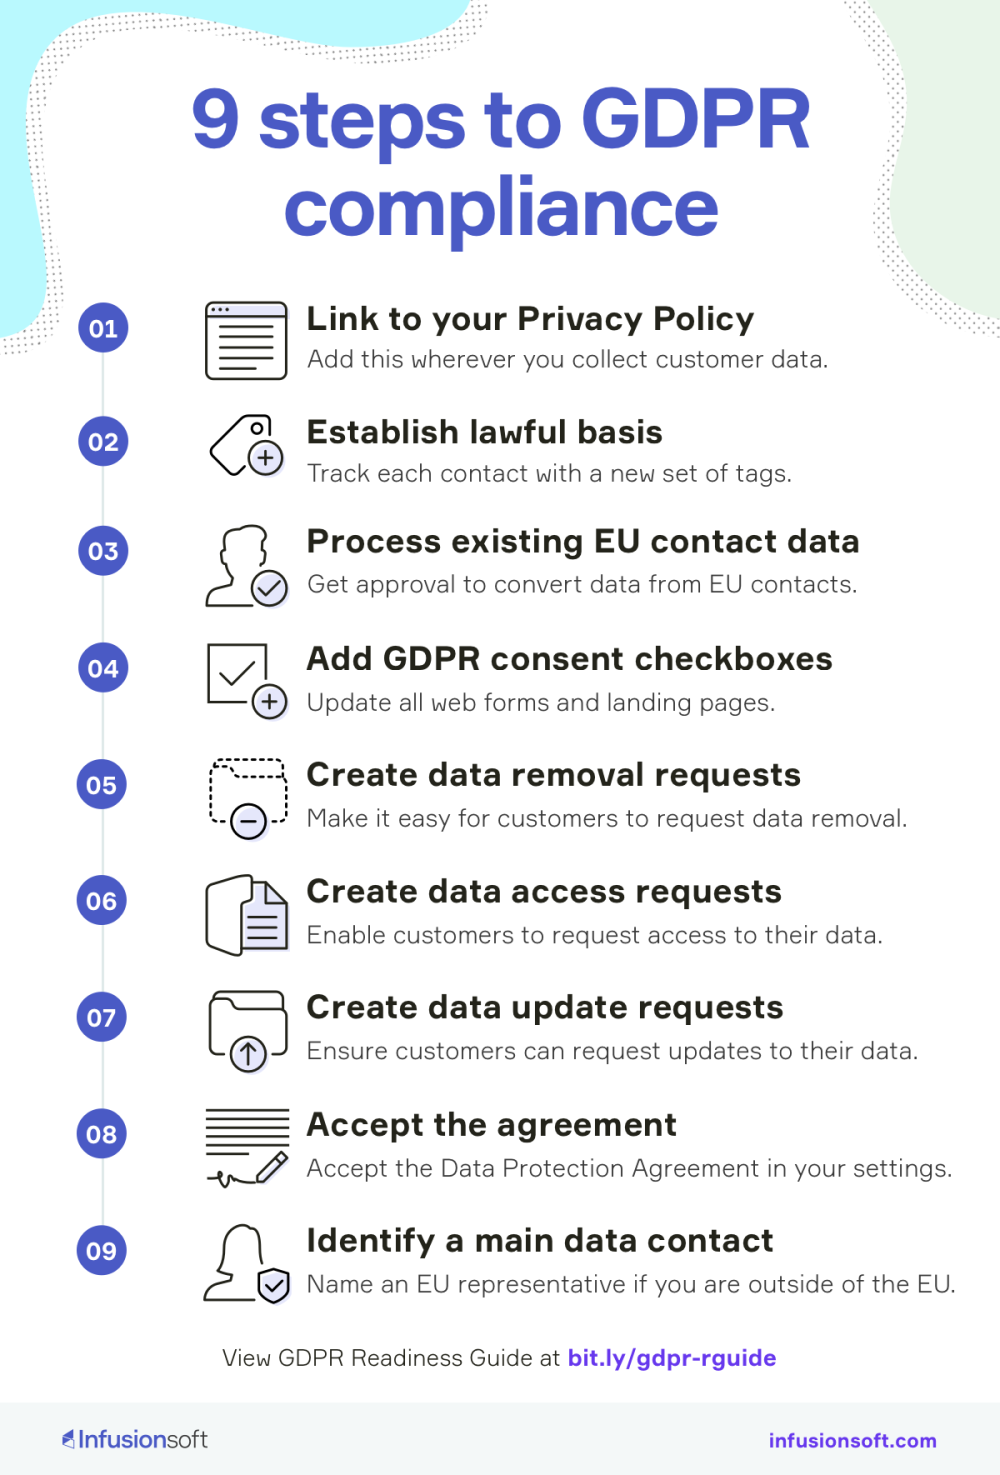 GDPR Compliance infographic